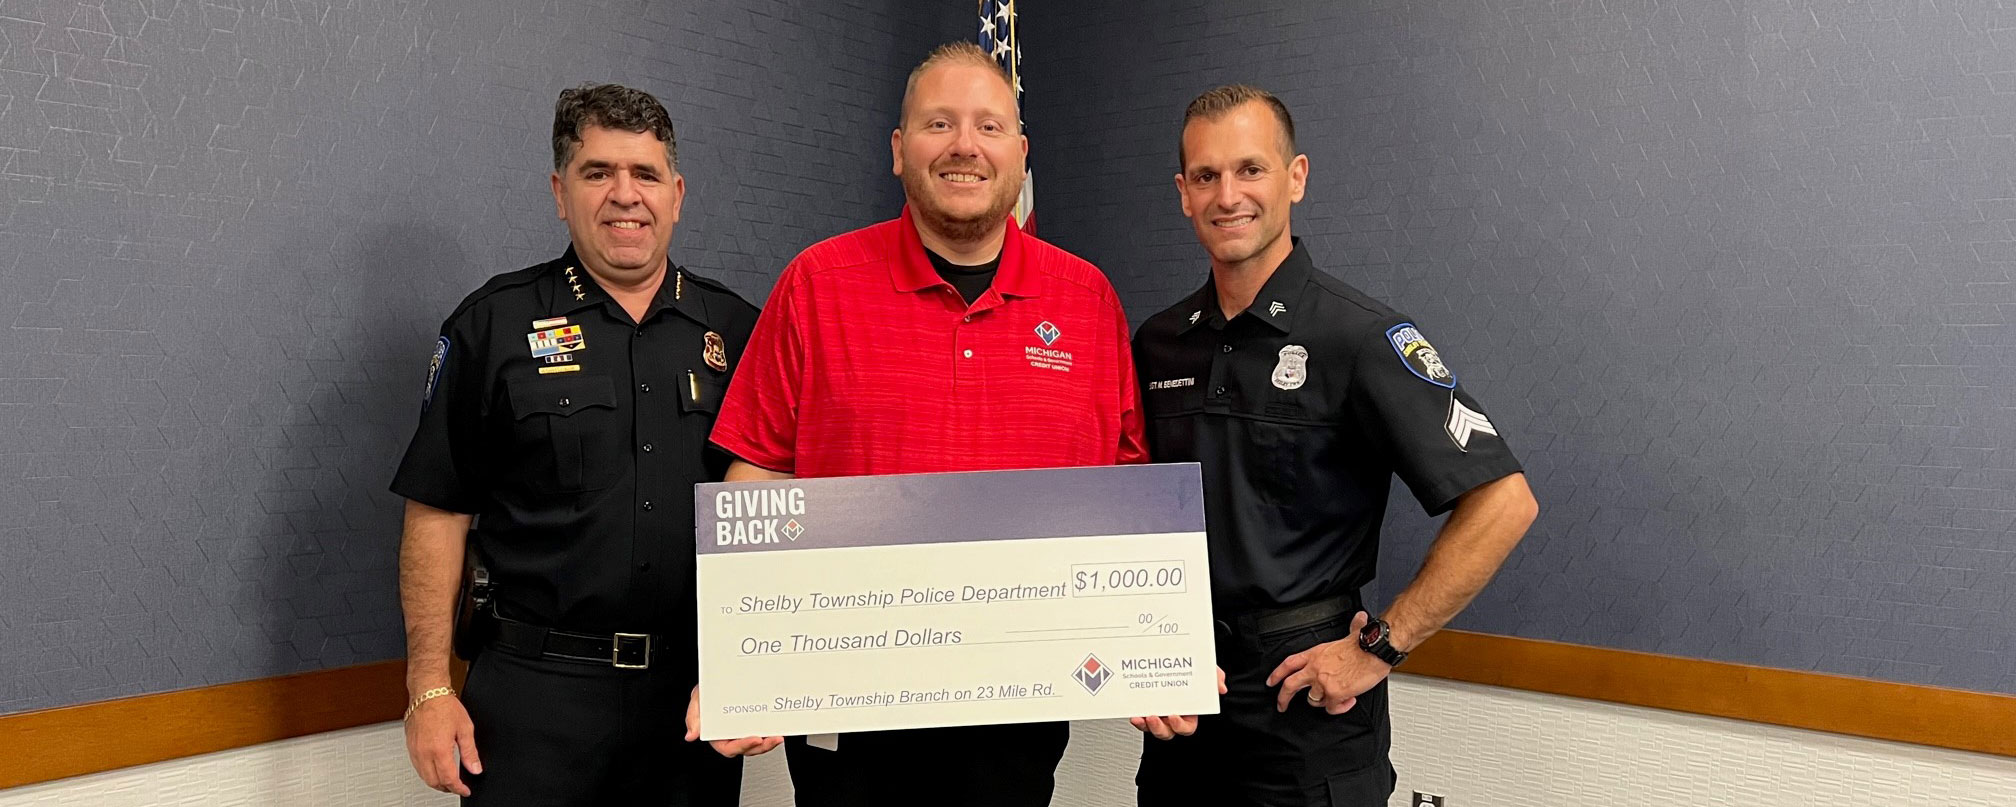 Shelby police department check presentation